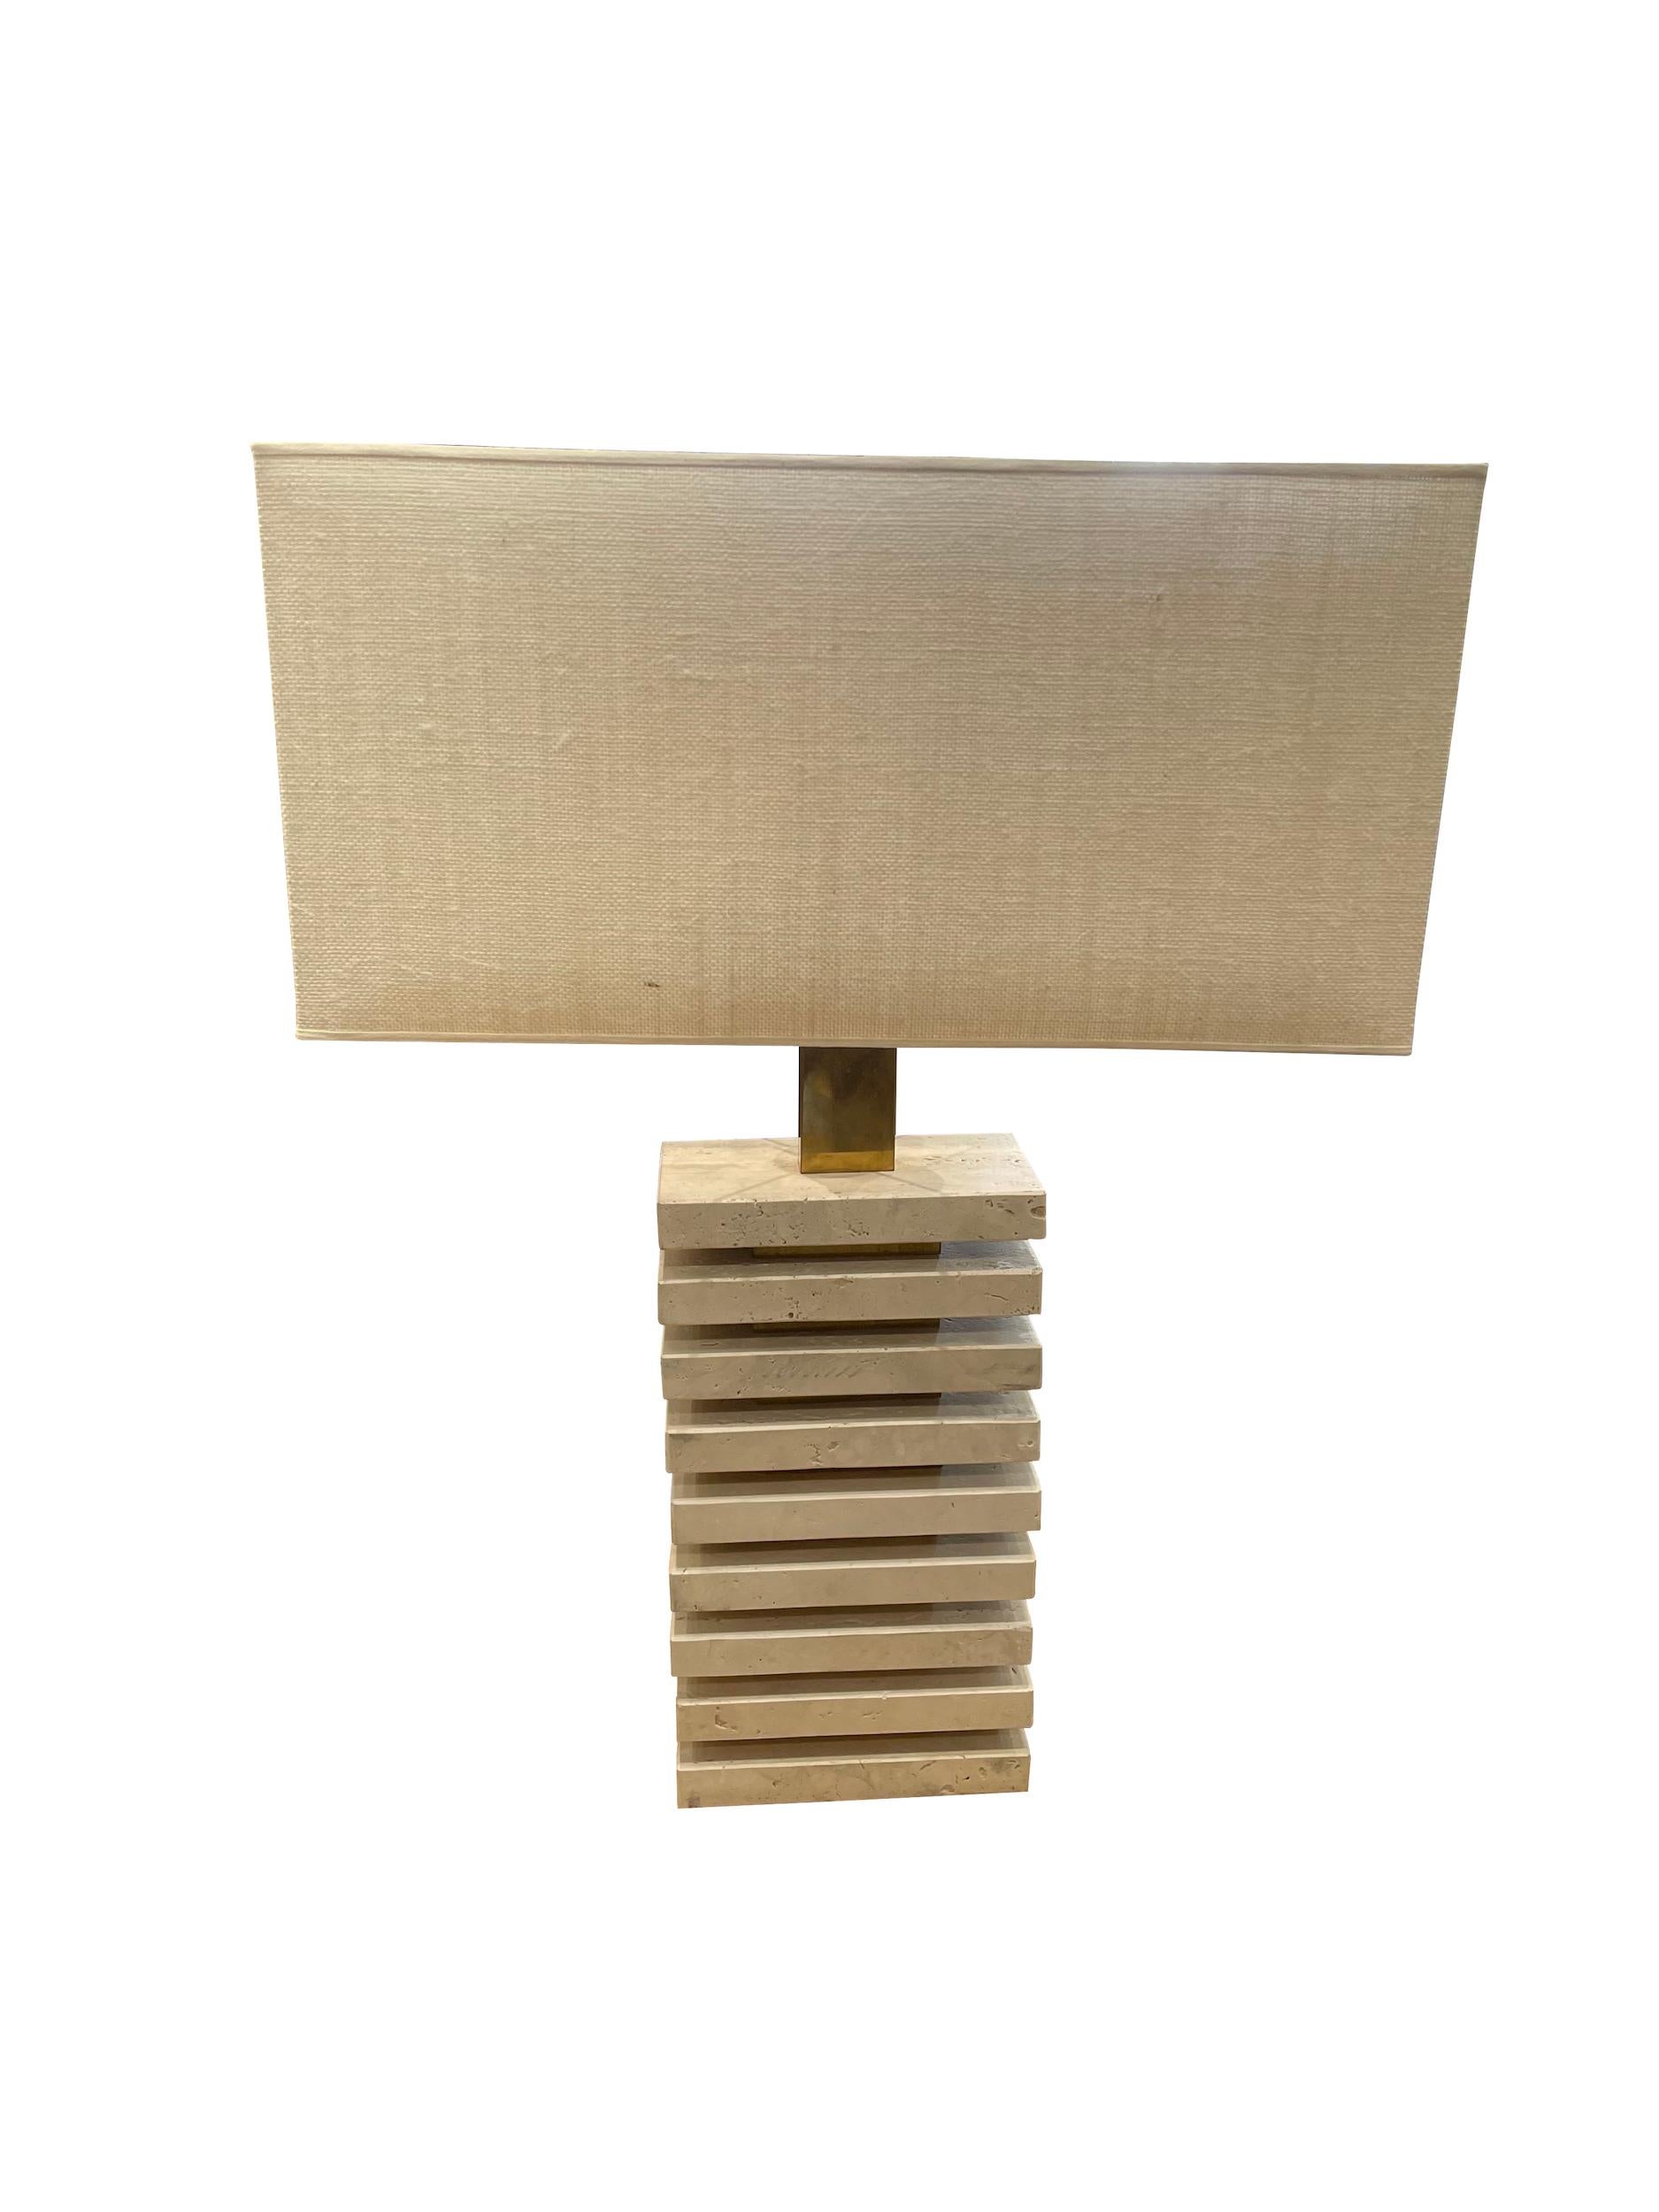 Contemporary French pair stacked rectangular pieces of travertine lamps.
New rectangular shades.
Measures: Base 8